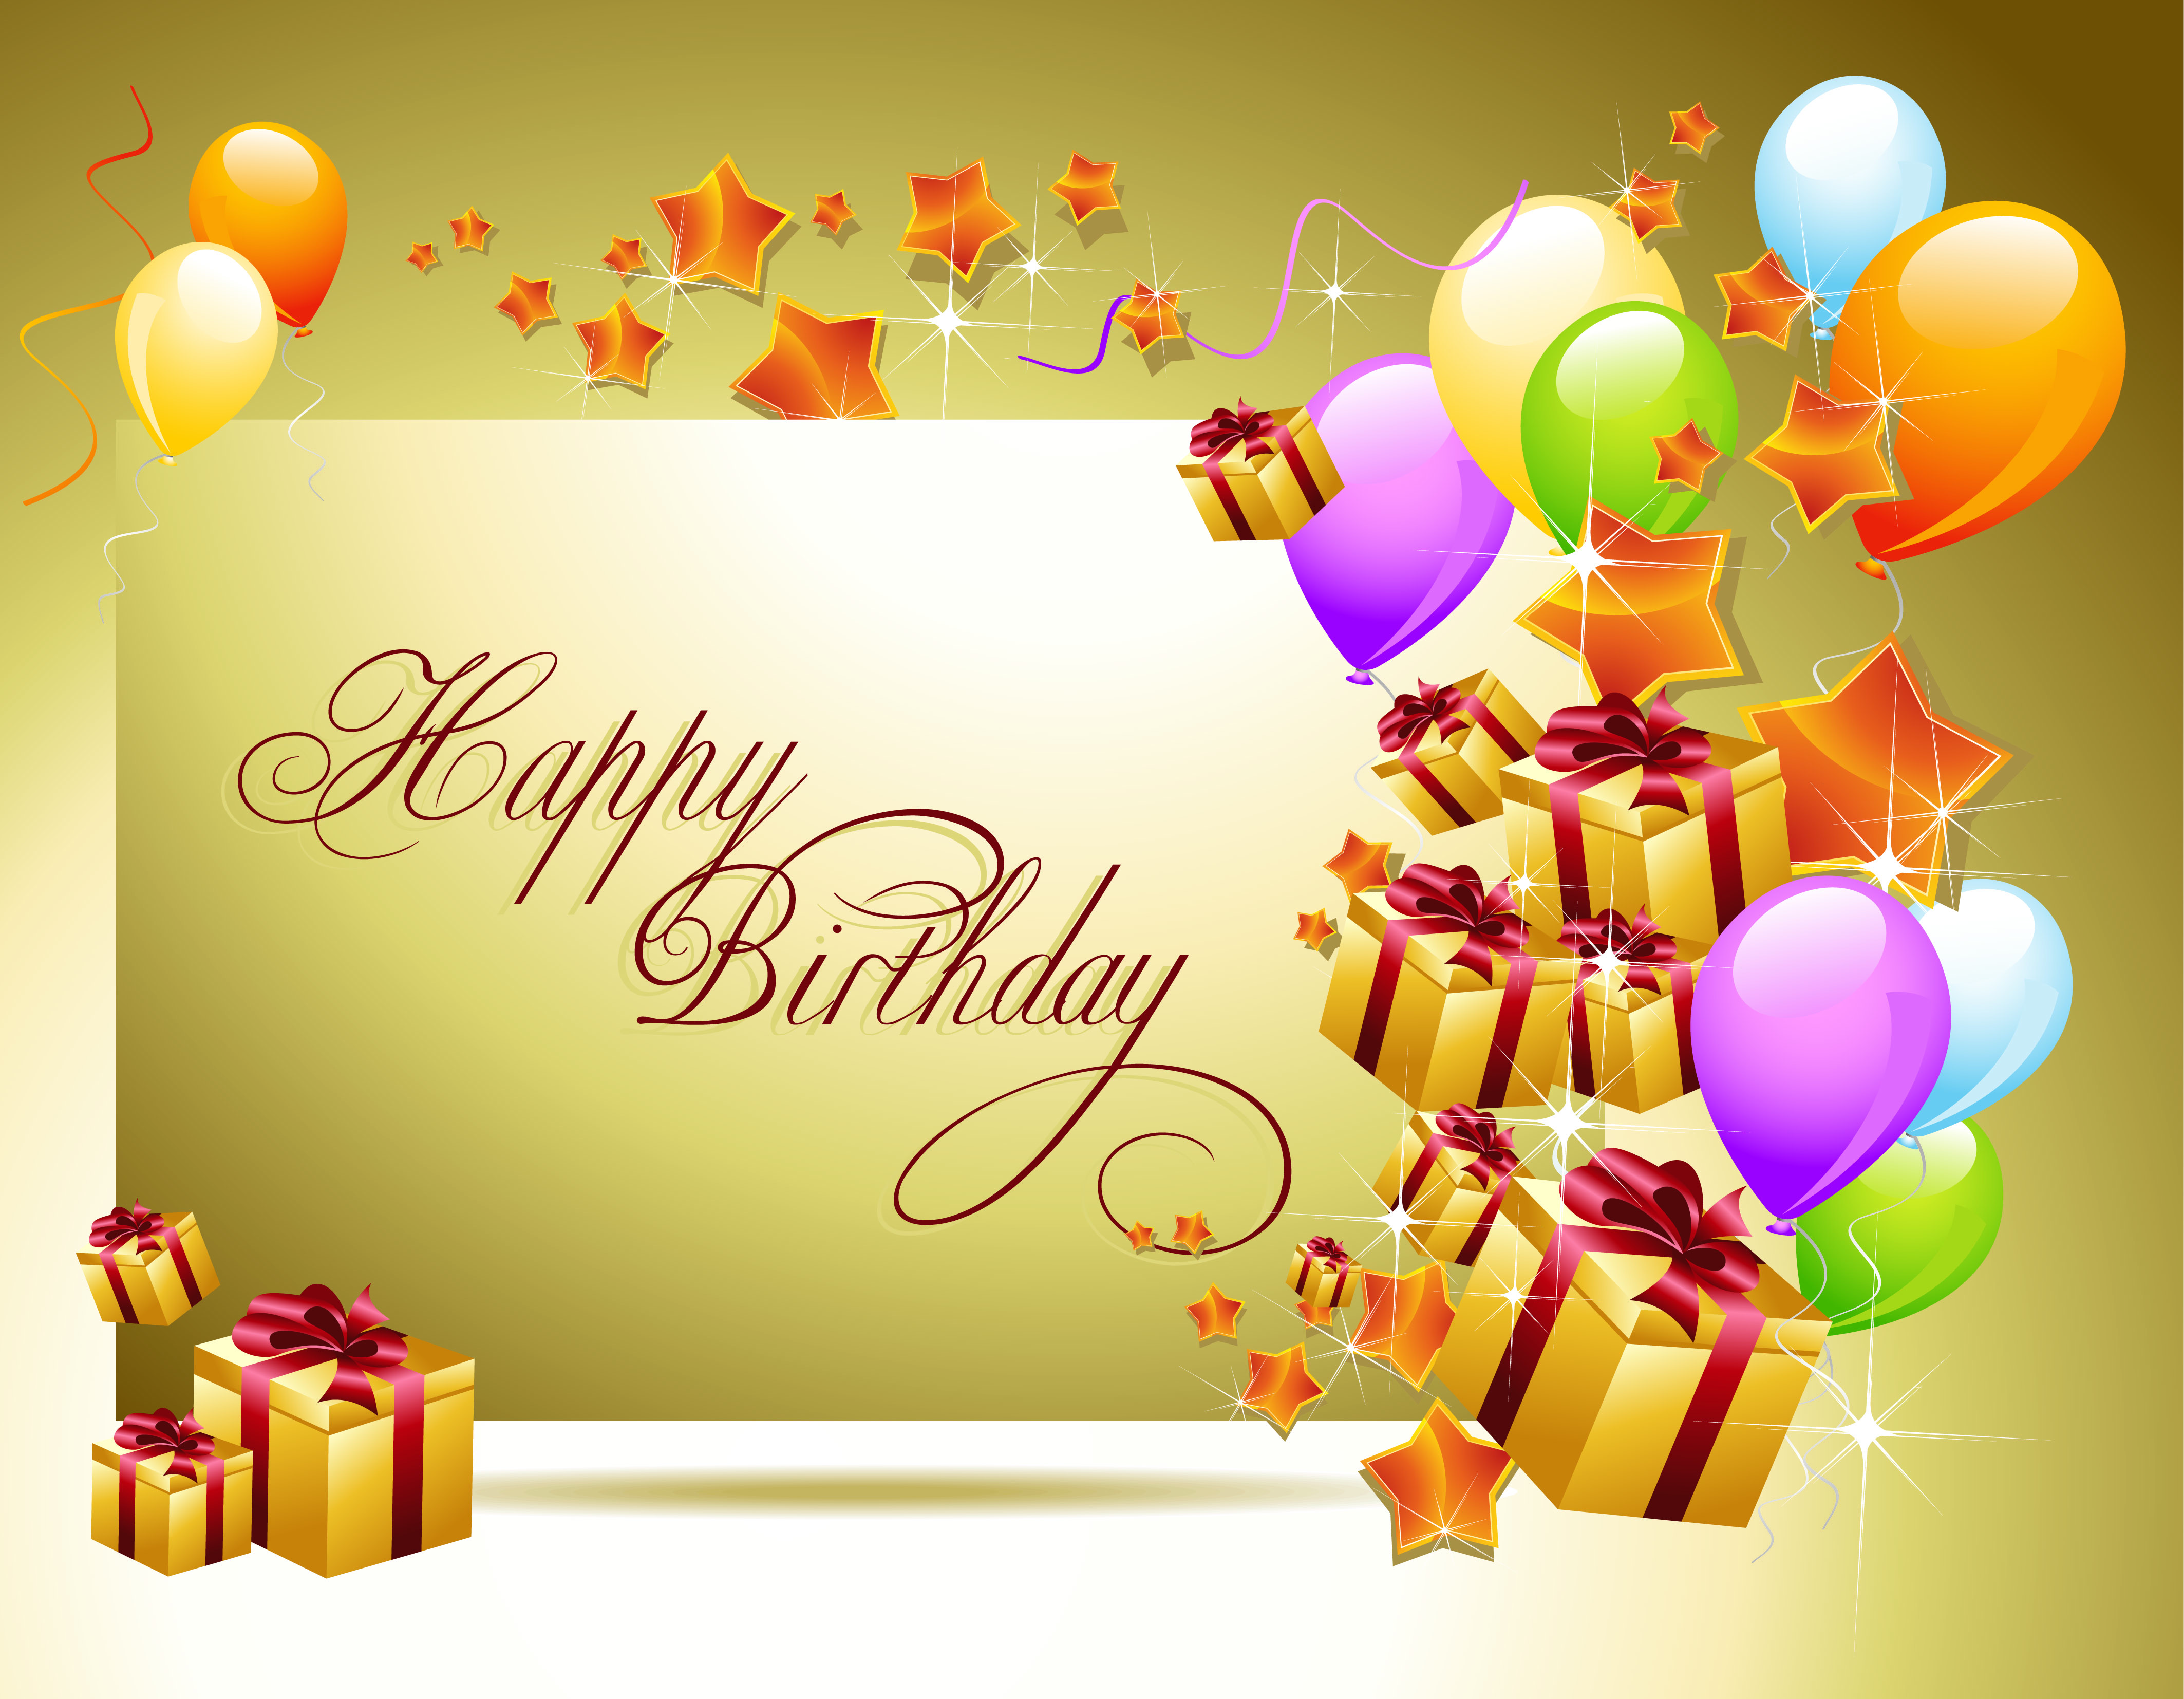 On The BirtHDay Golden Background Wallpaper And Image